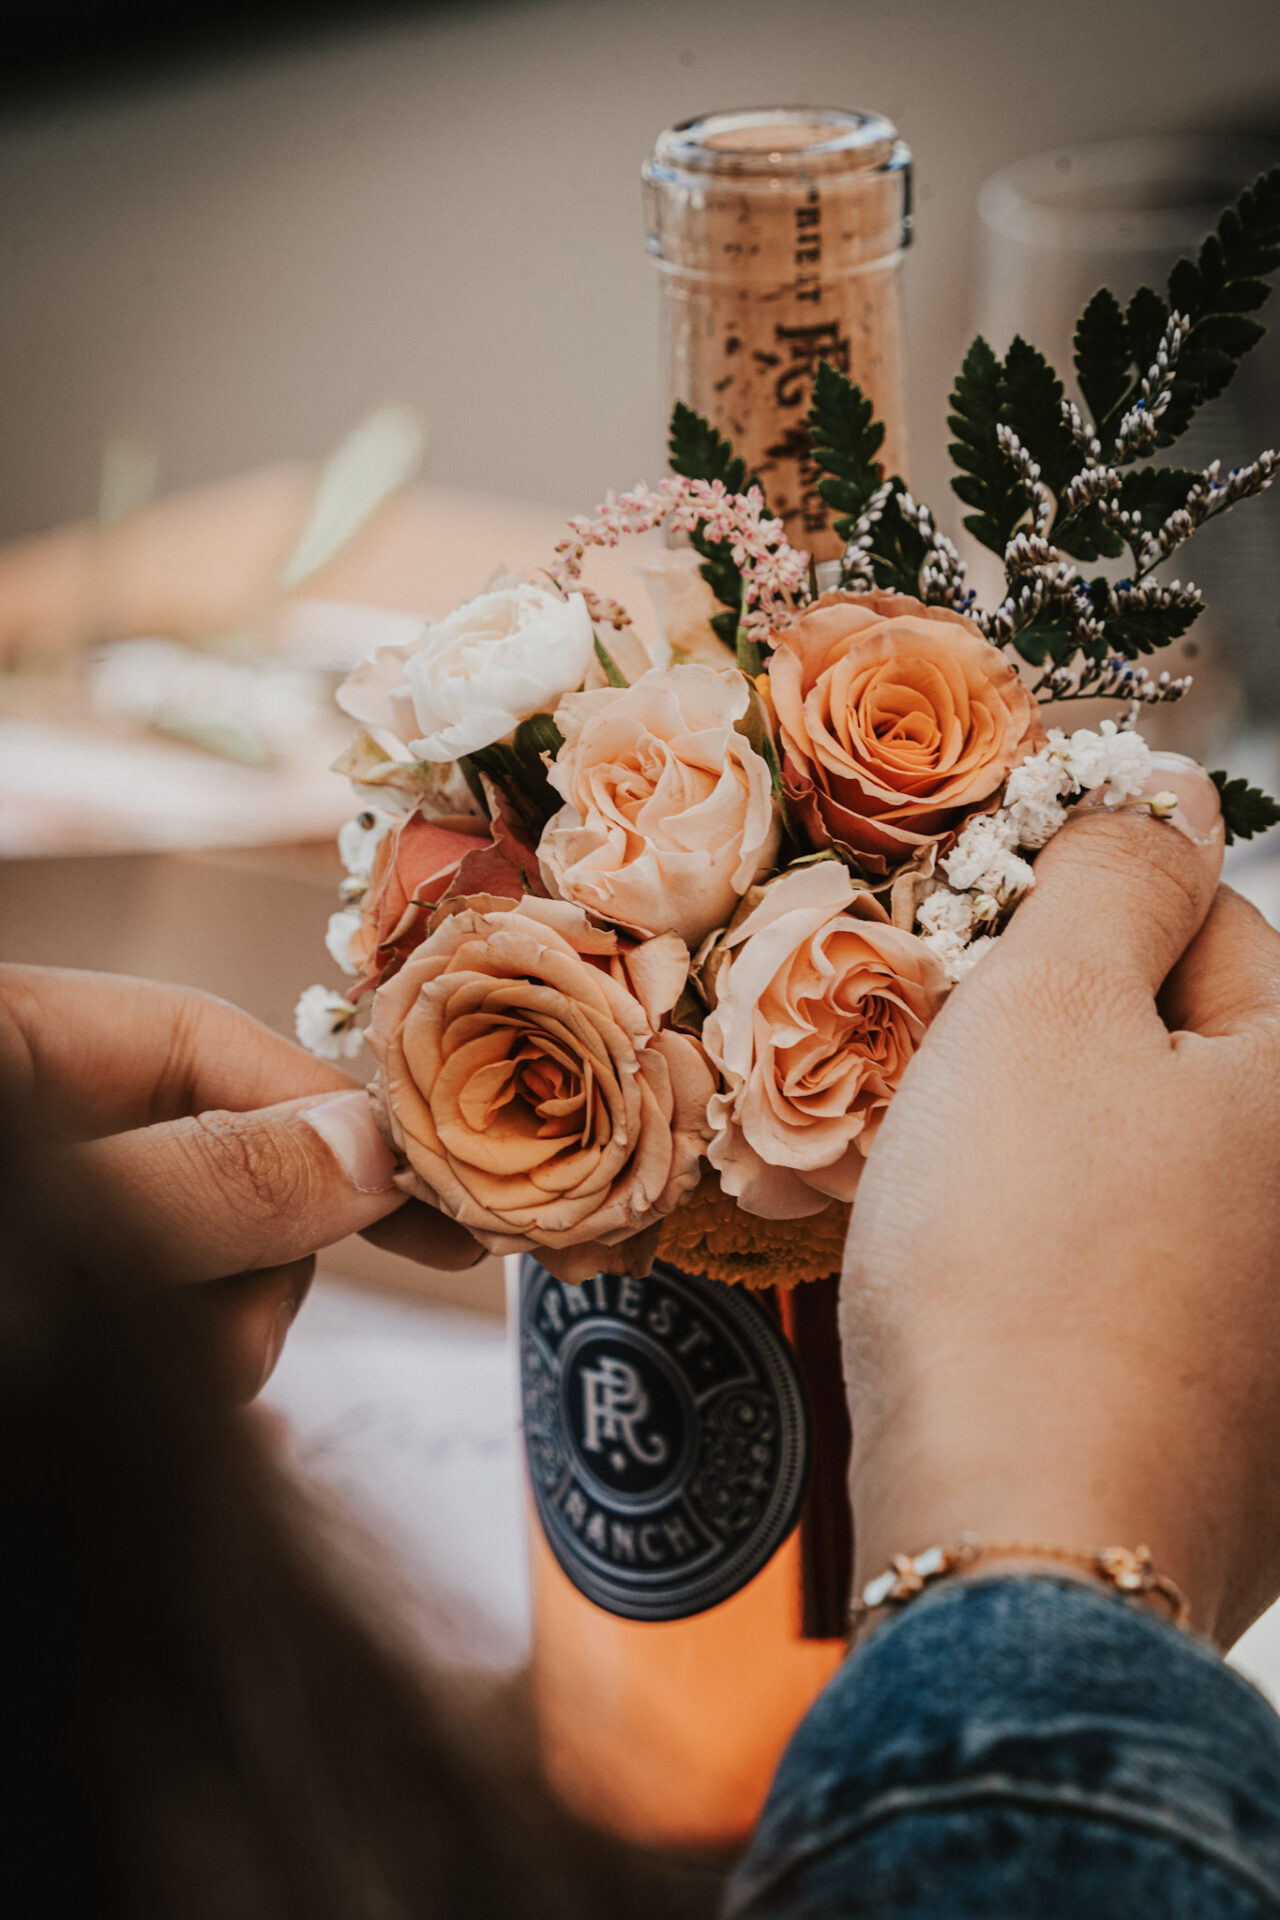 Wine Bottle Bouquet with flowers and hands